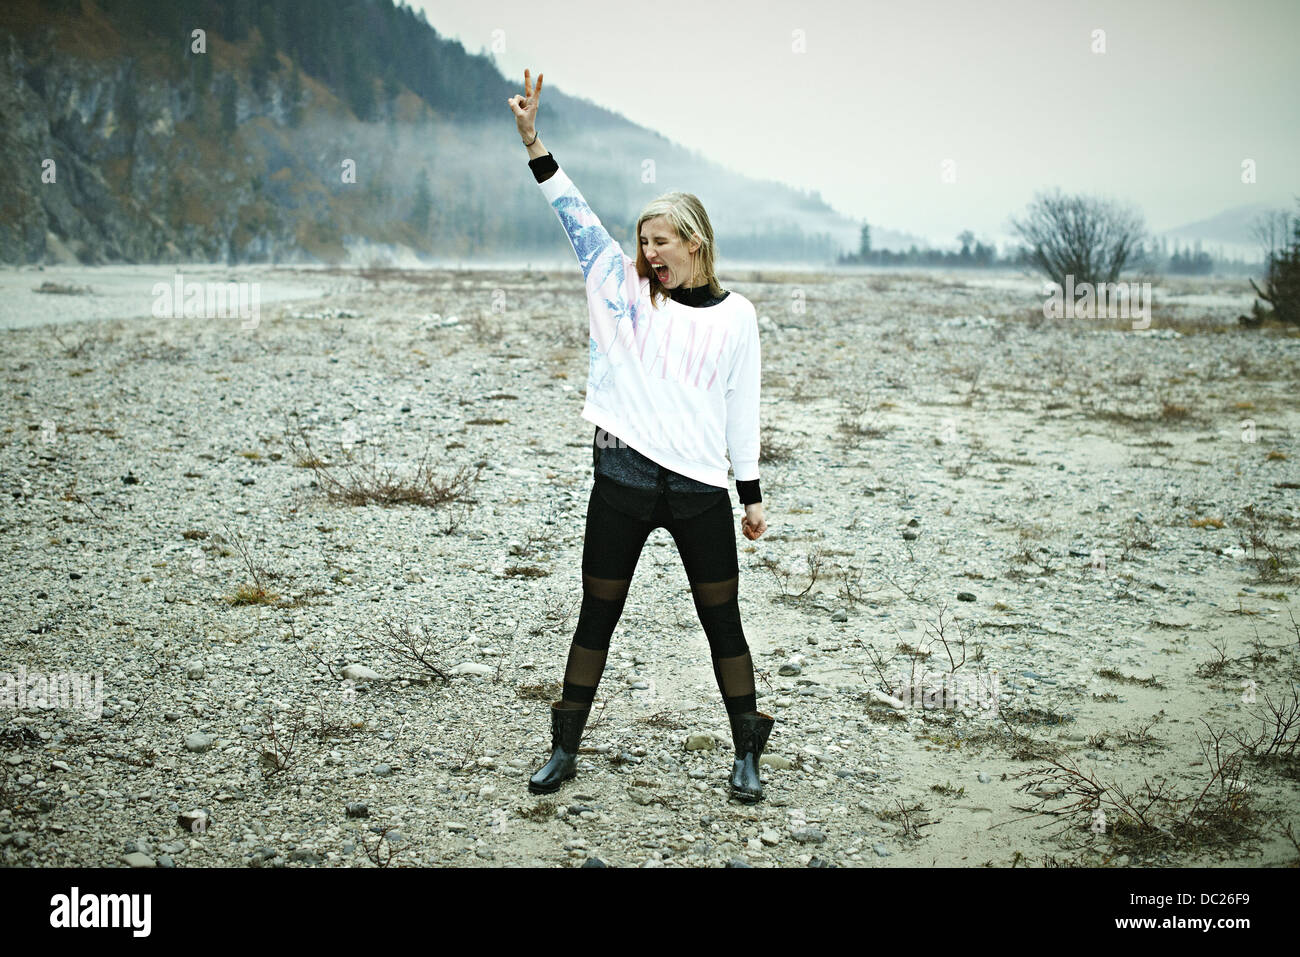 Woman standing in remote setting making peace sign Stock Photo